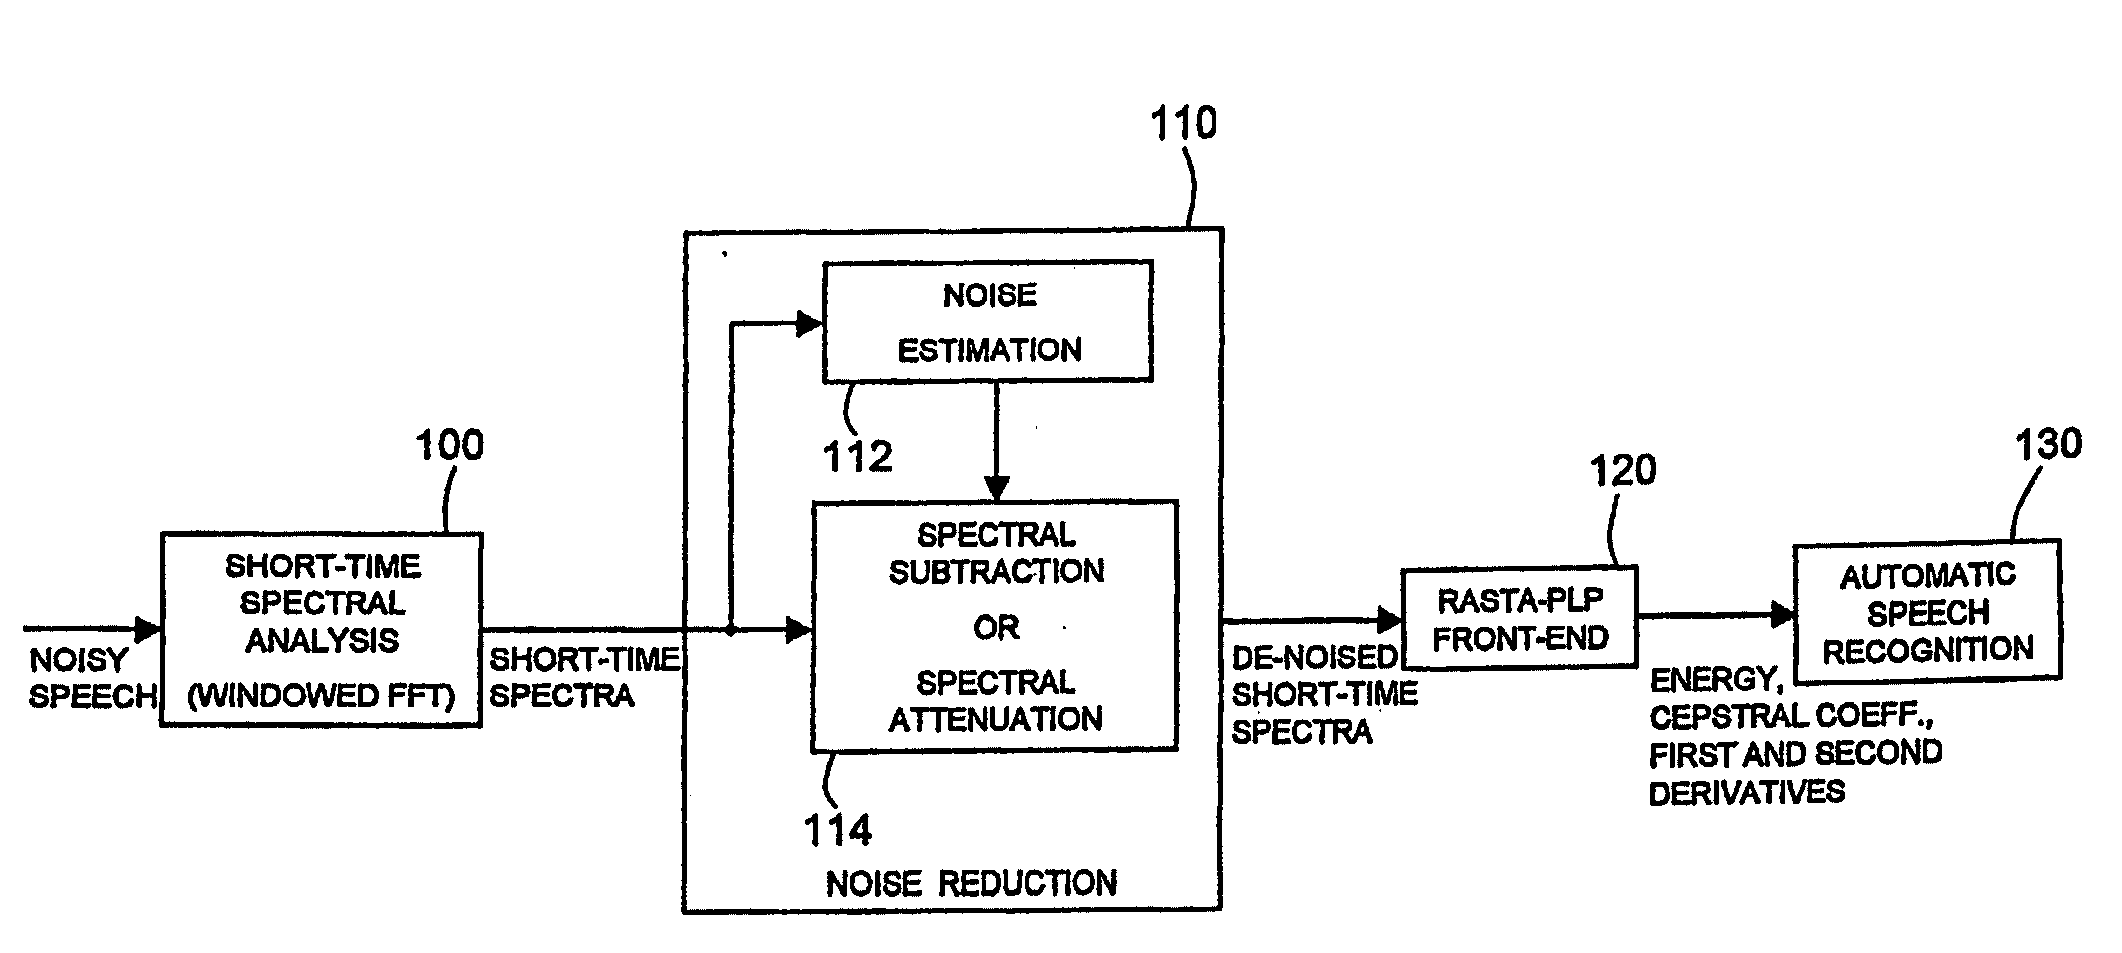 Noise reduction for automatic speech recognition